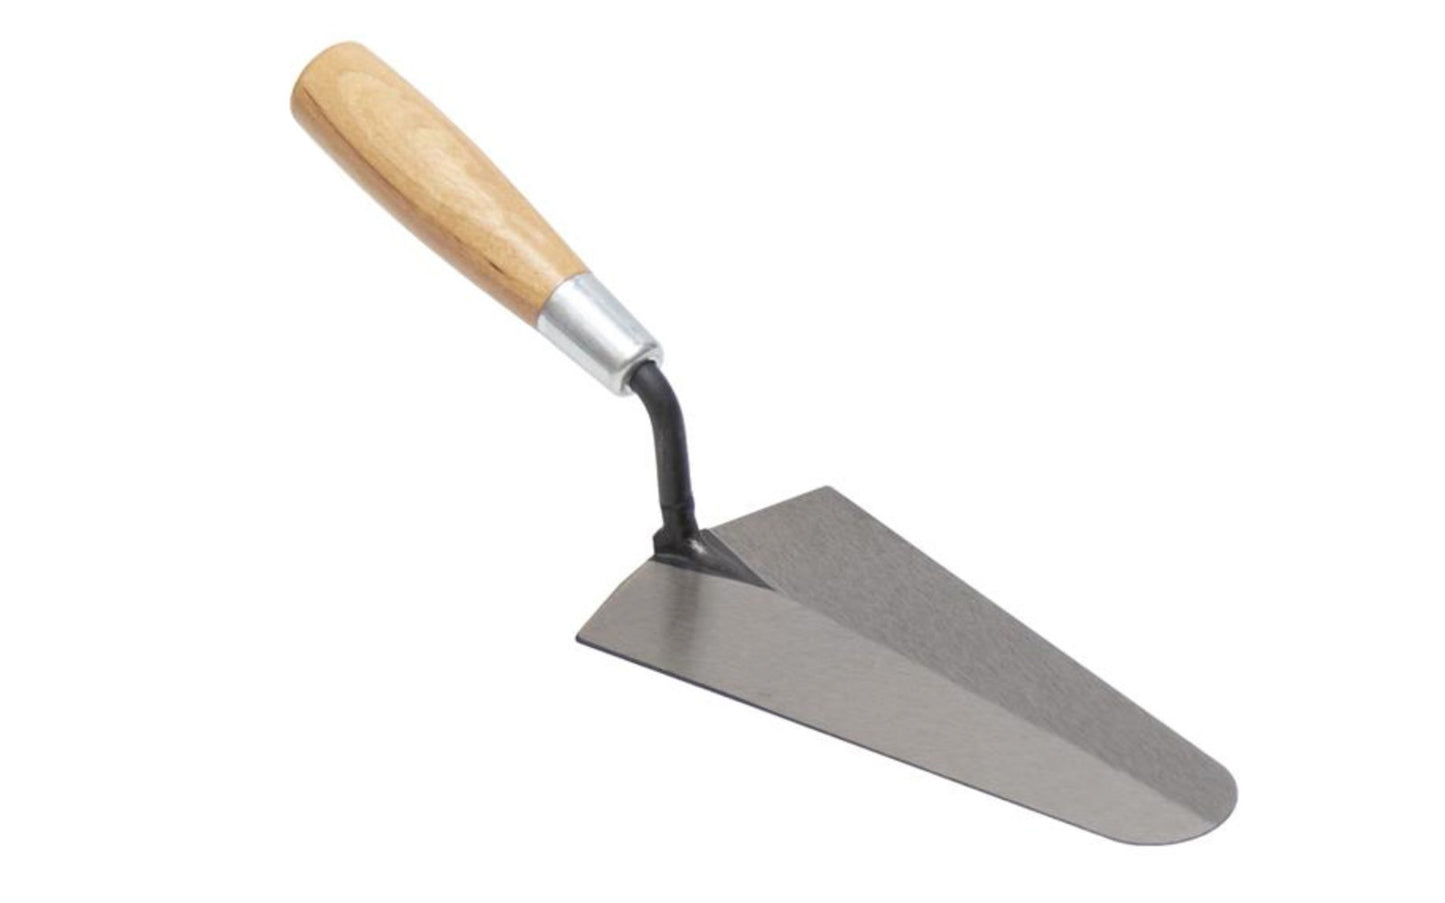 Marshalltown Insulator’s Trowel, or Bullnose Trowel, is specially designed with a flexible high carbon steel blade & elongated tang that makes it ideal for working insulation around pipes and other tight spaces. Model 48A ~ 035965007504